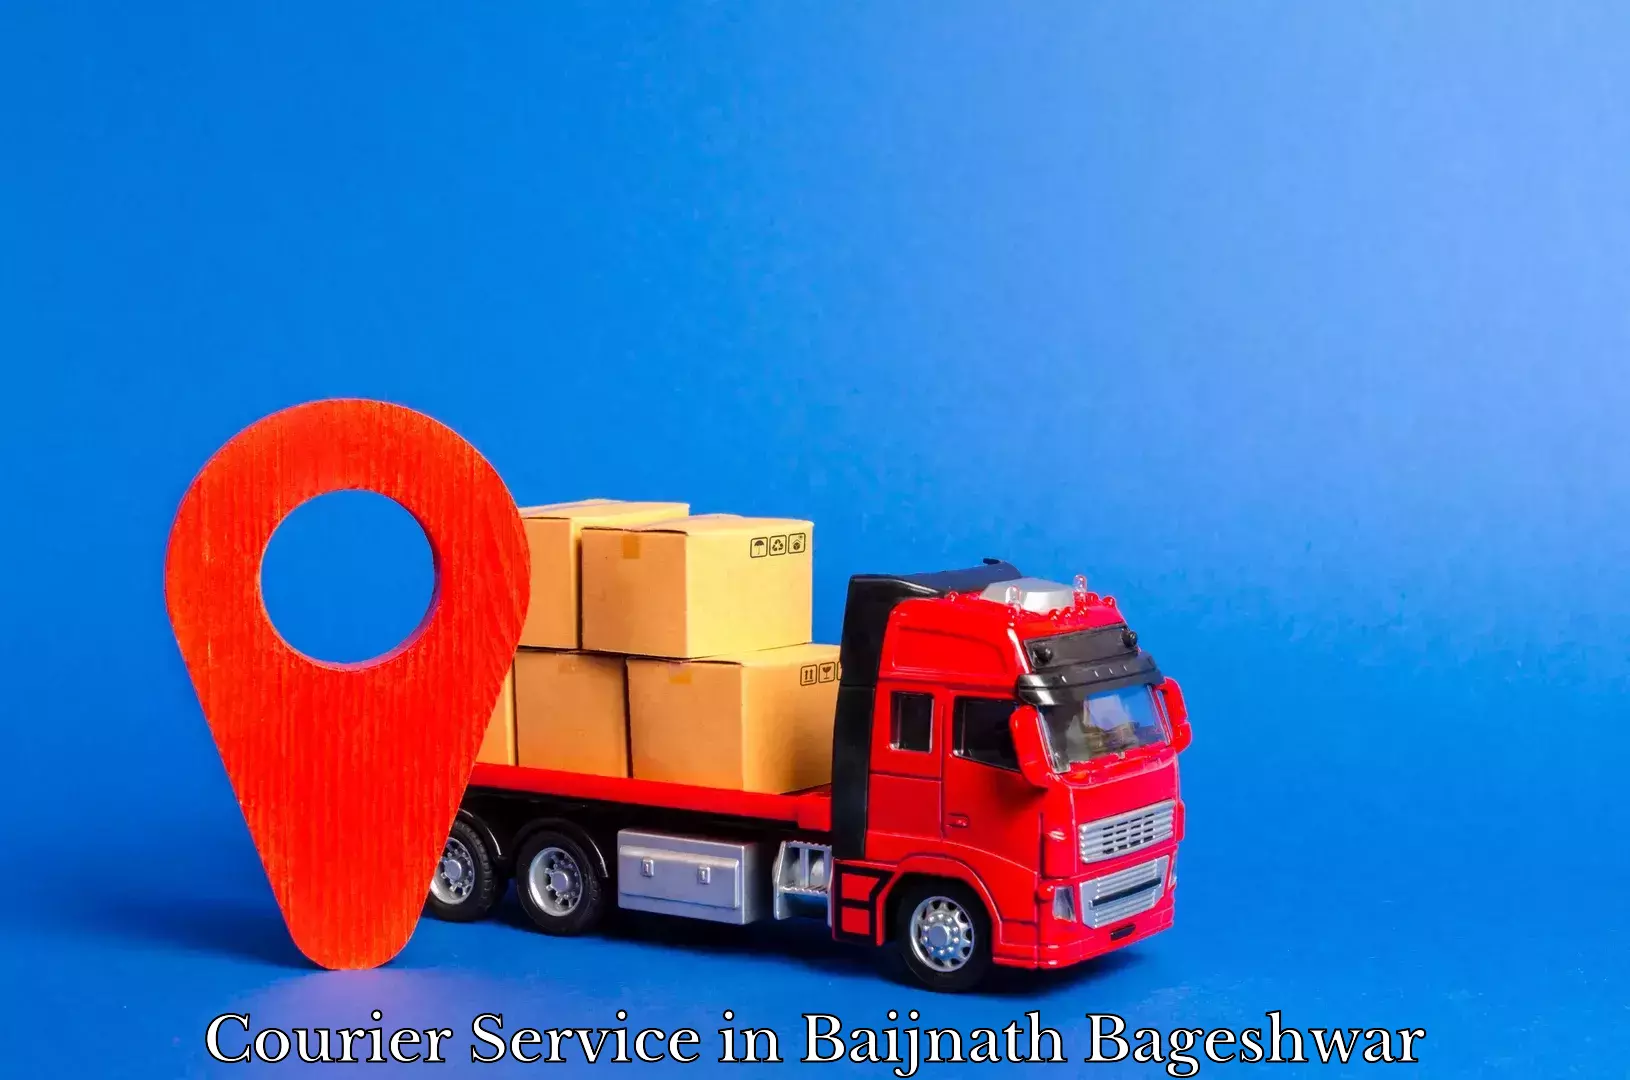 Enhanced delivery experience in Baijnath Bageshwar